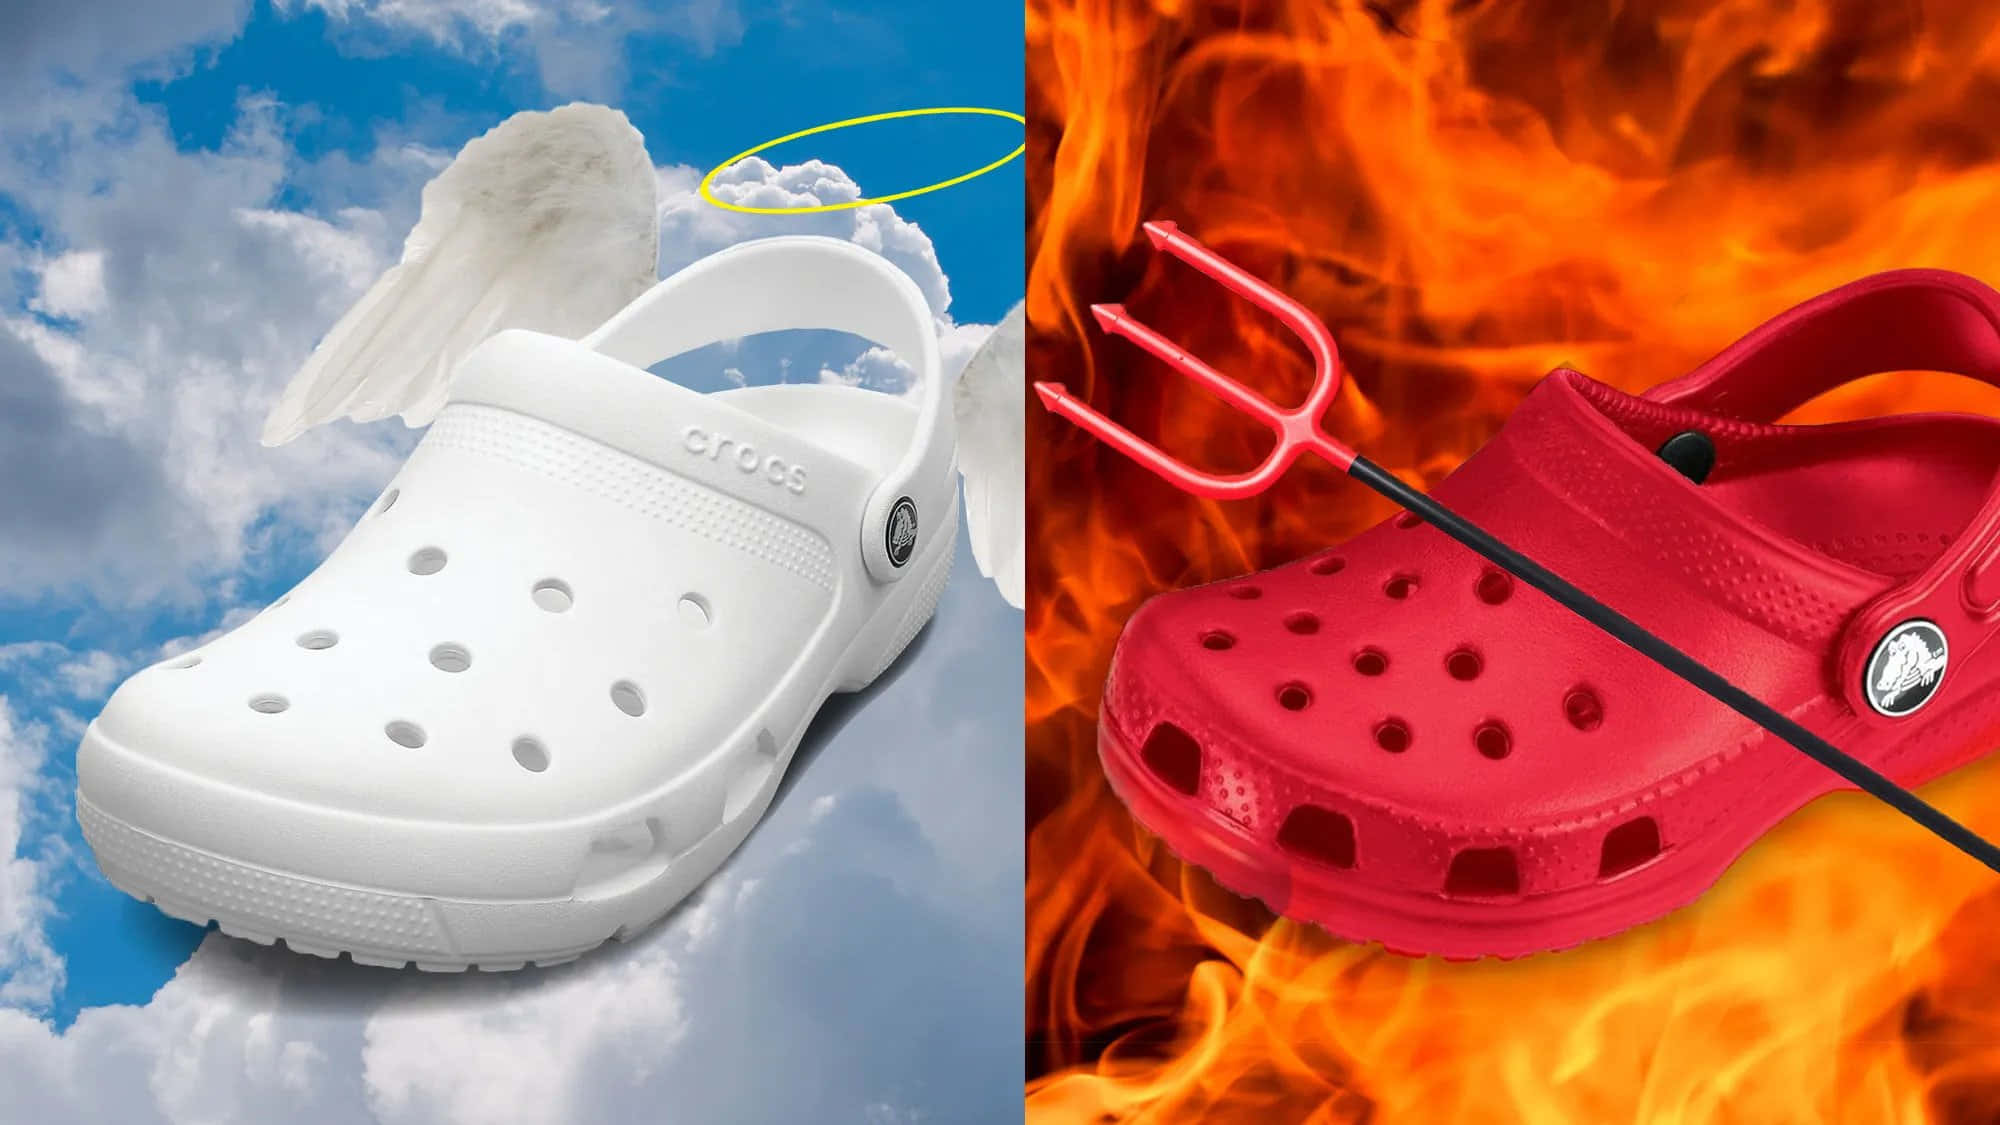 Crocs Shoes In The Fire